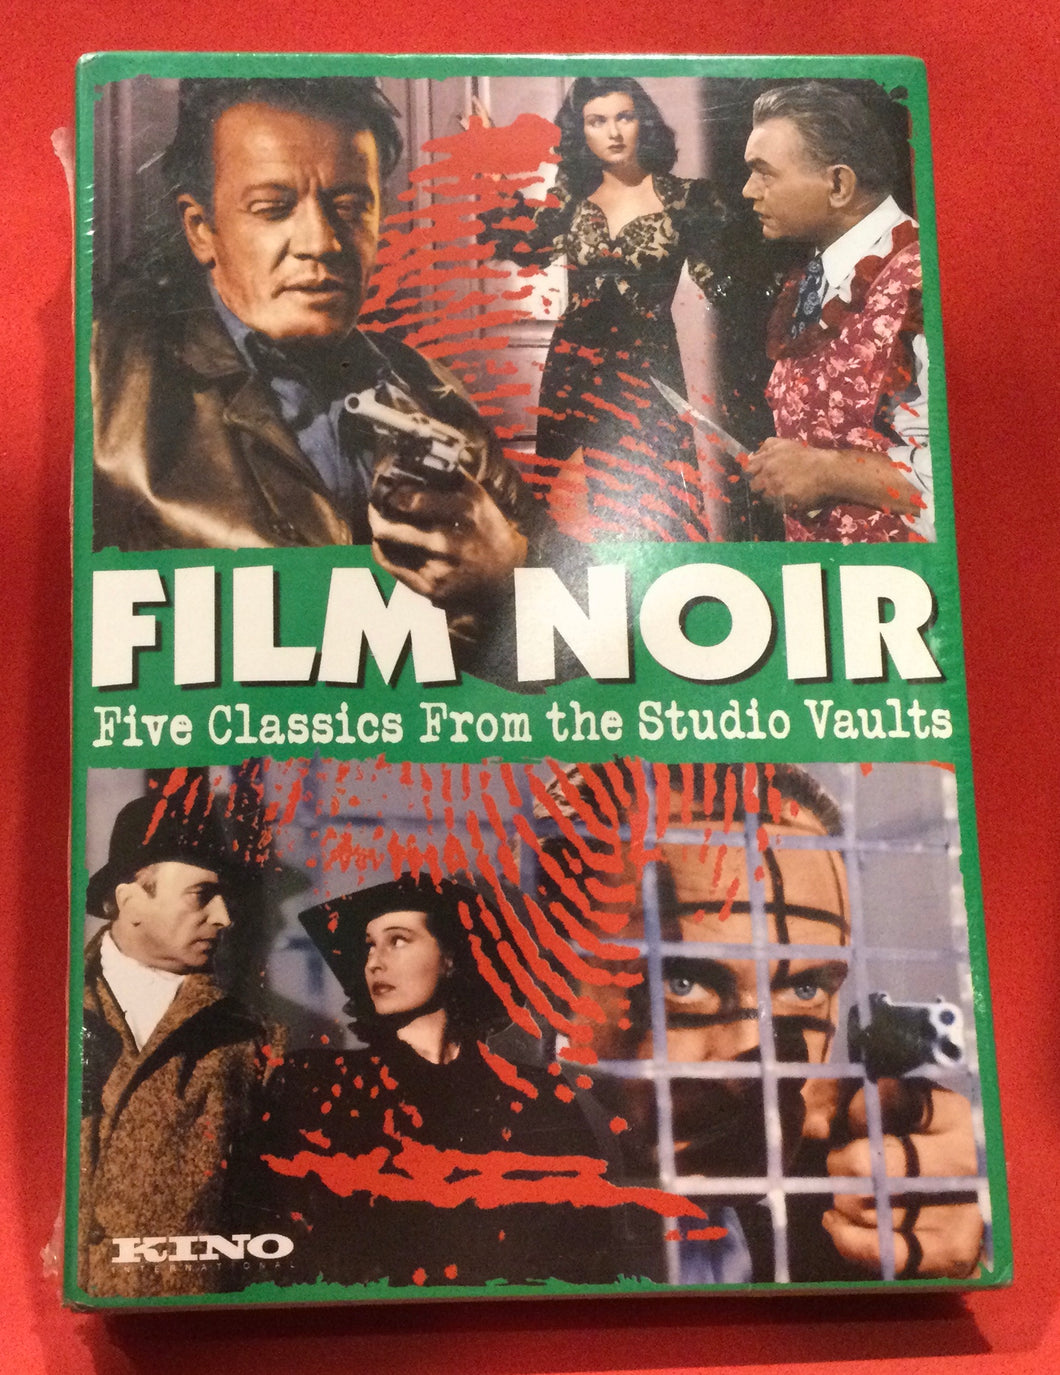 FILM NOIR - FIVE CLASSIC FILMS FROM THE STUDIO VAULTS - 5 DVD DISCS (SEALED)